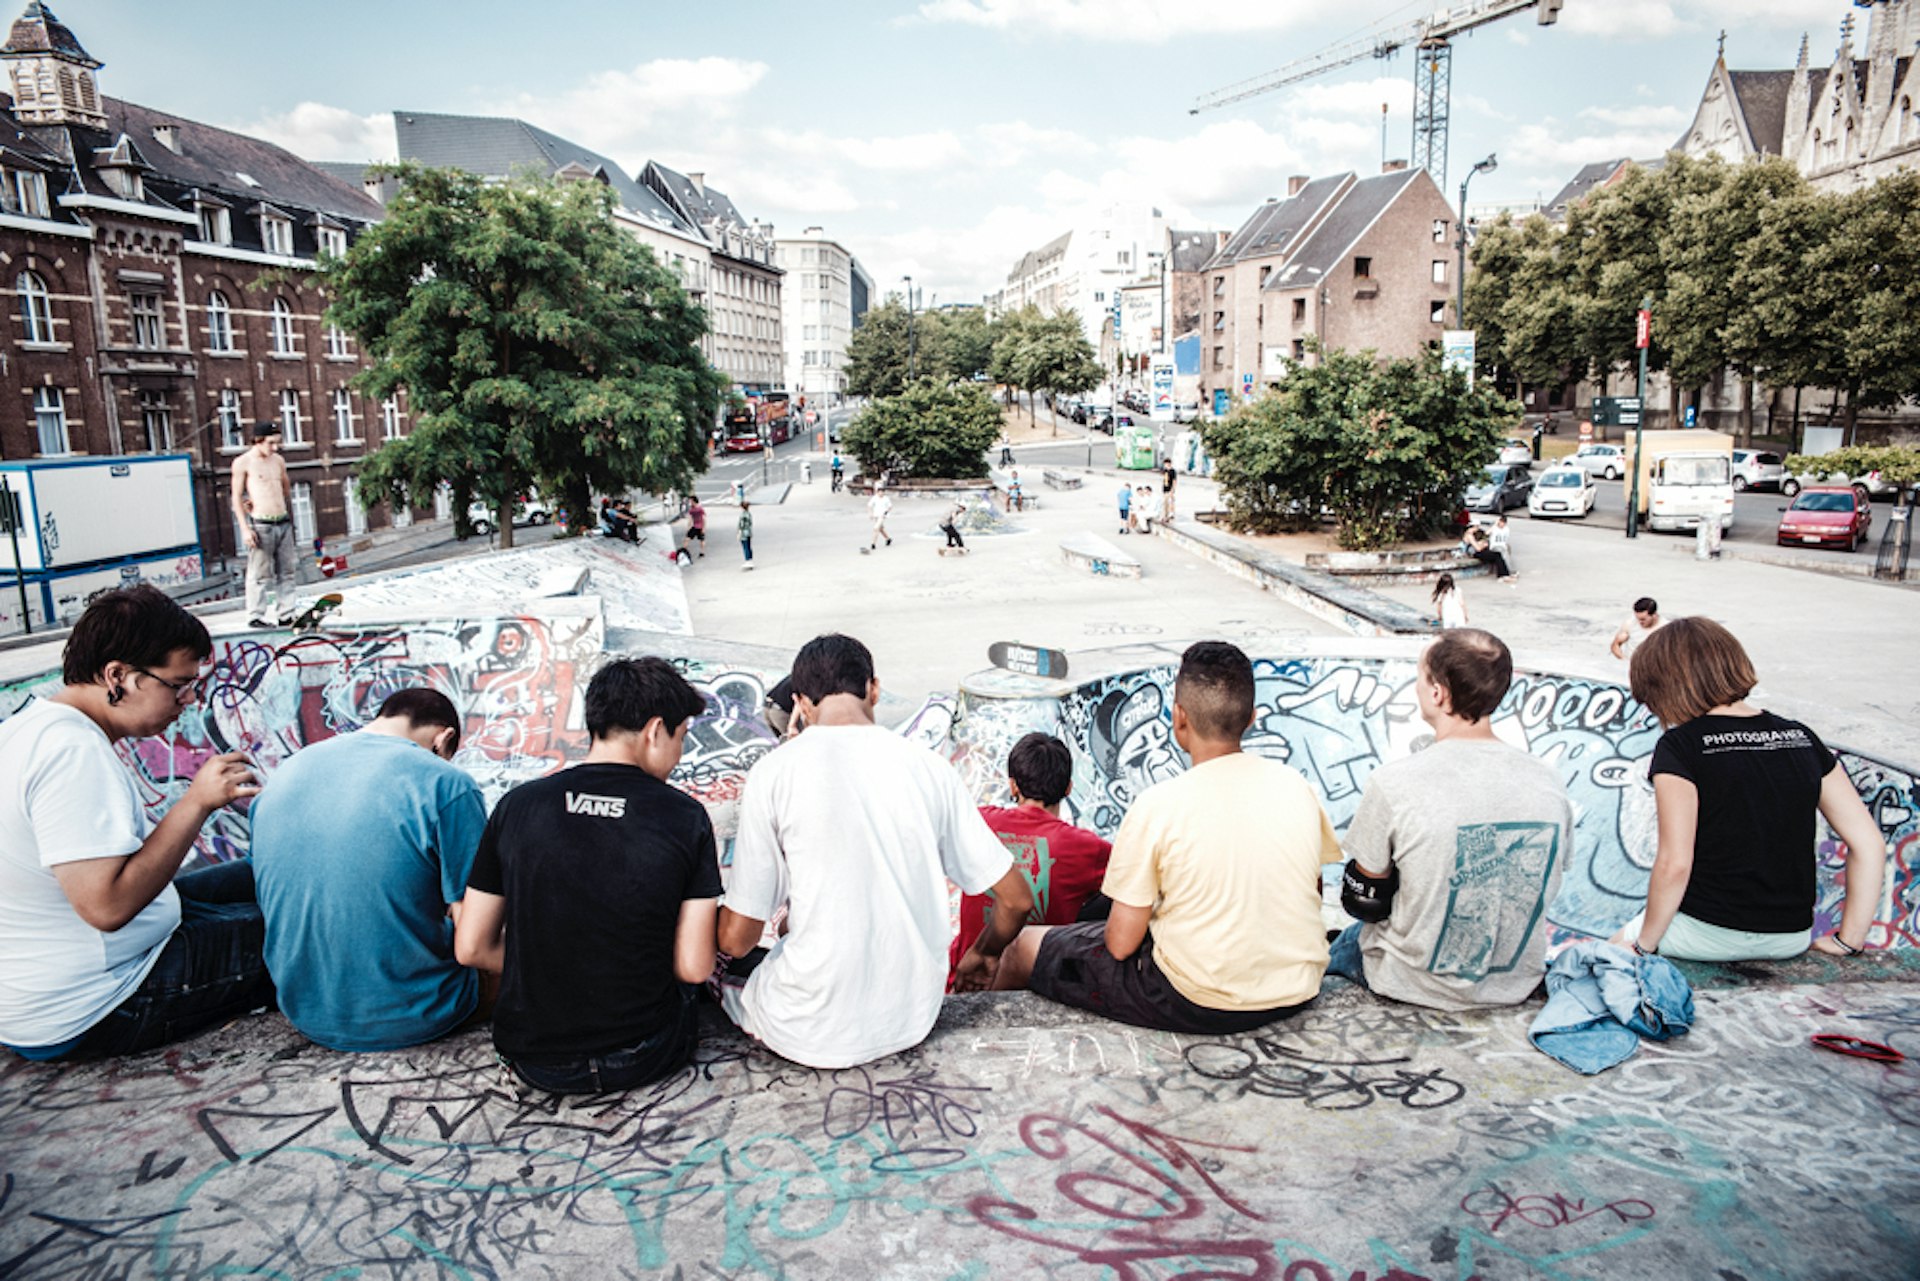 Meet the Brussels skaters overcoming cultural barriers to create their own utopia